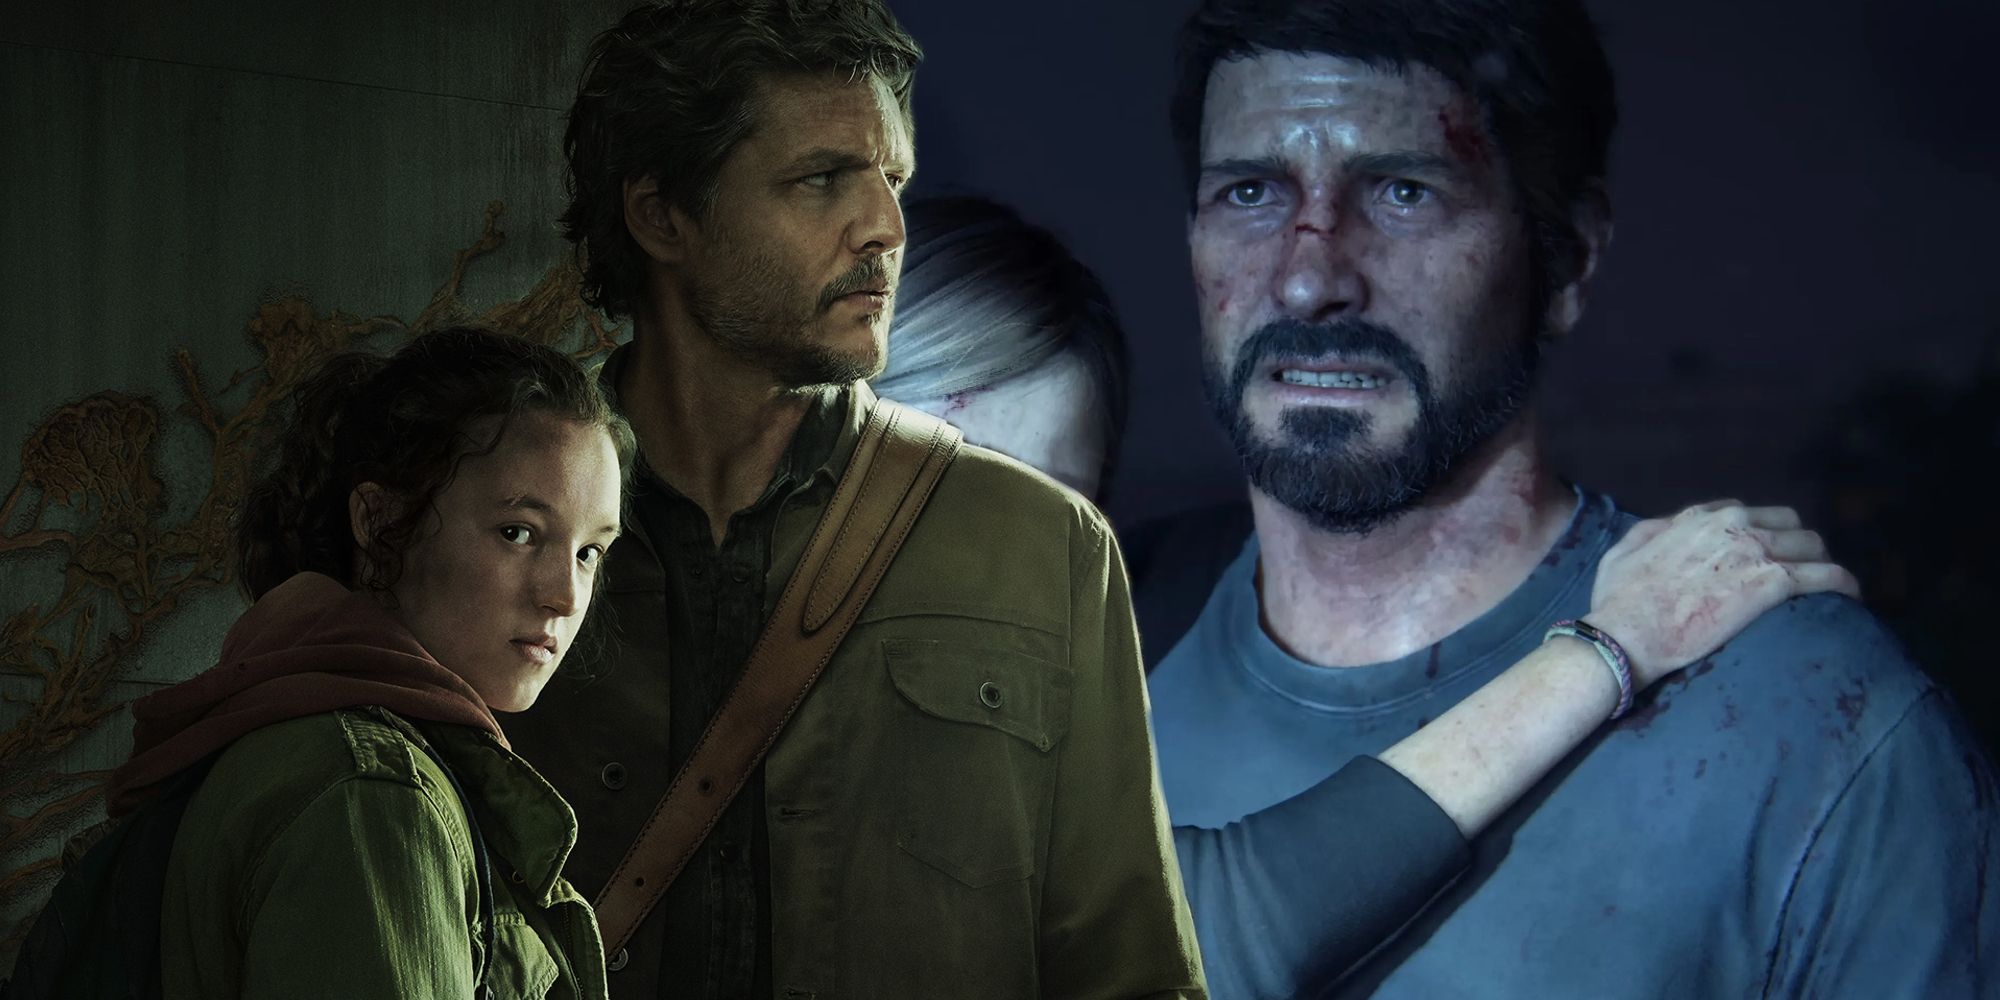 The Last of Us' Does What No Show Has Done Before